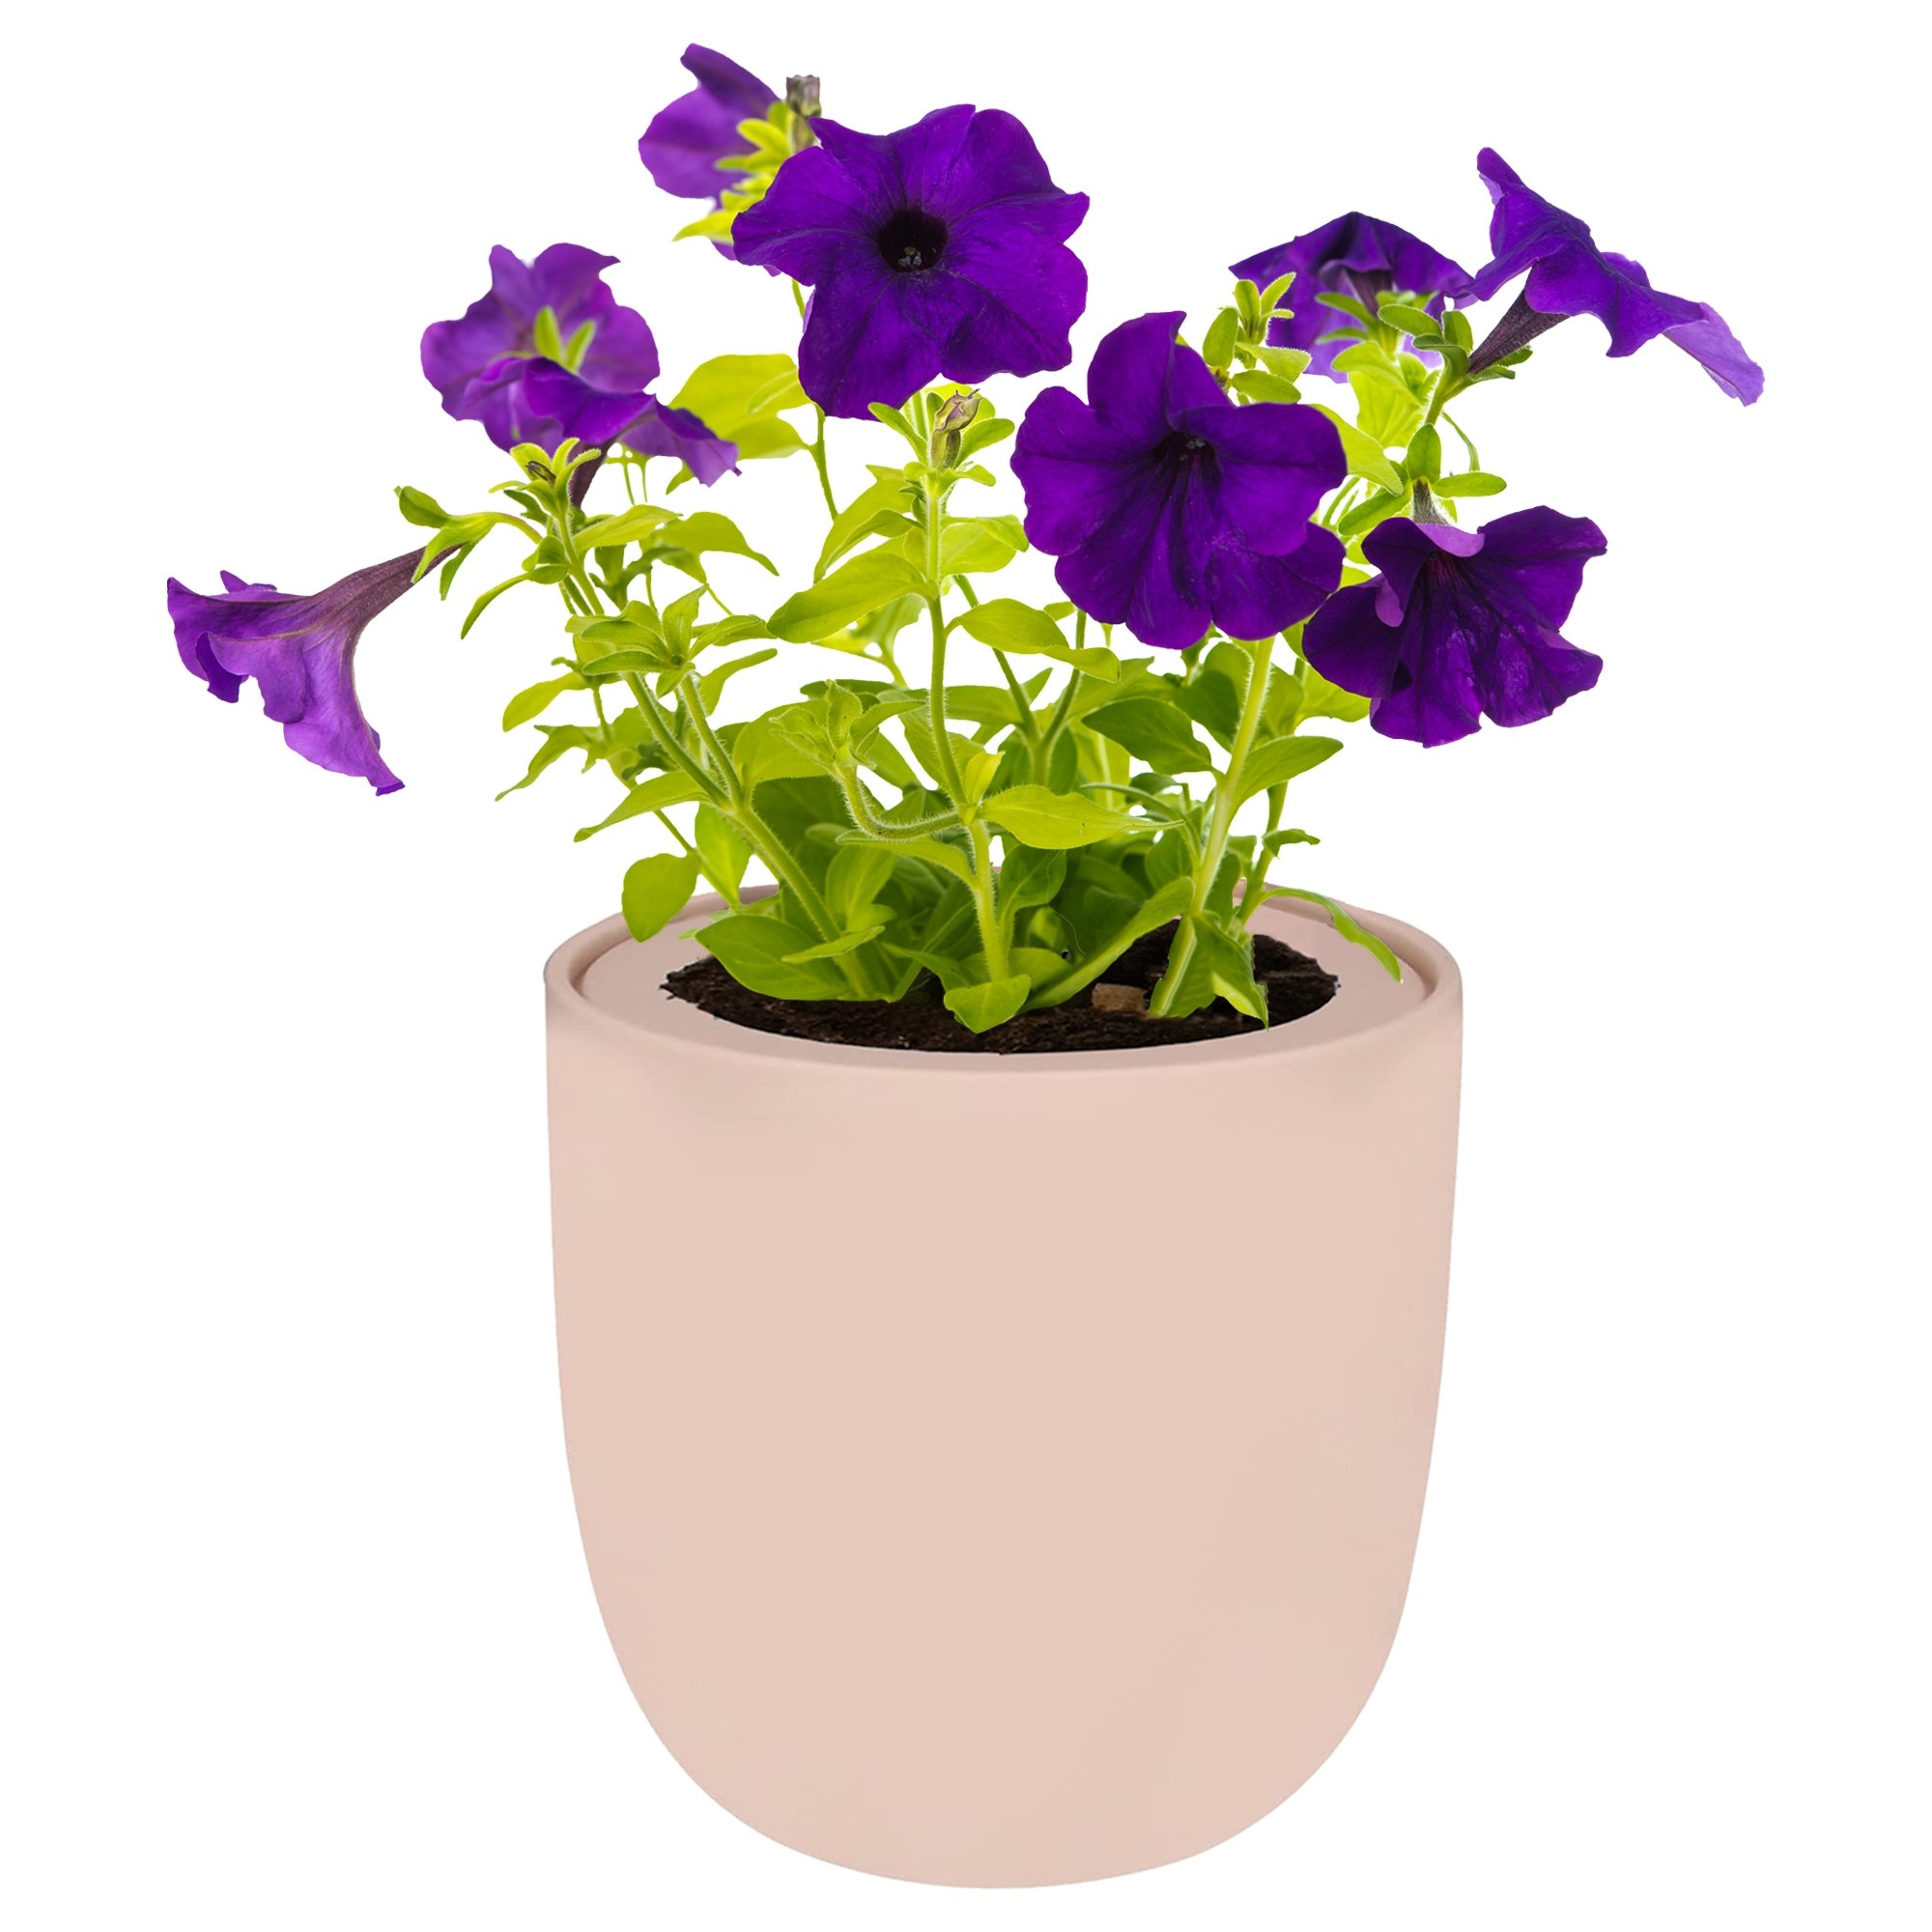 Viola - Johnny Jump Up Pink Ceramic Pot Hydroponic Growing Kit with Seeds